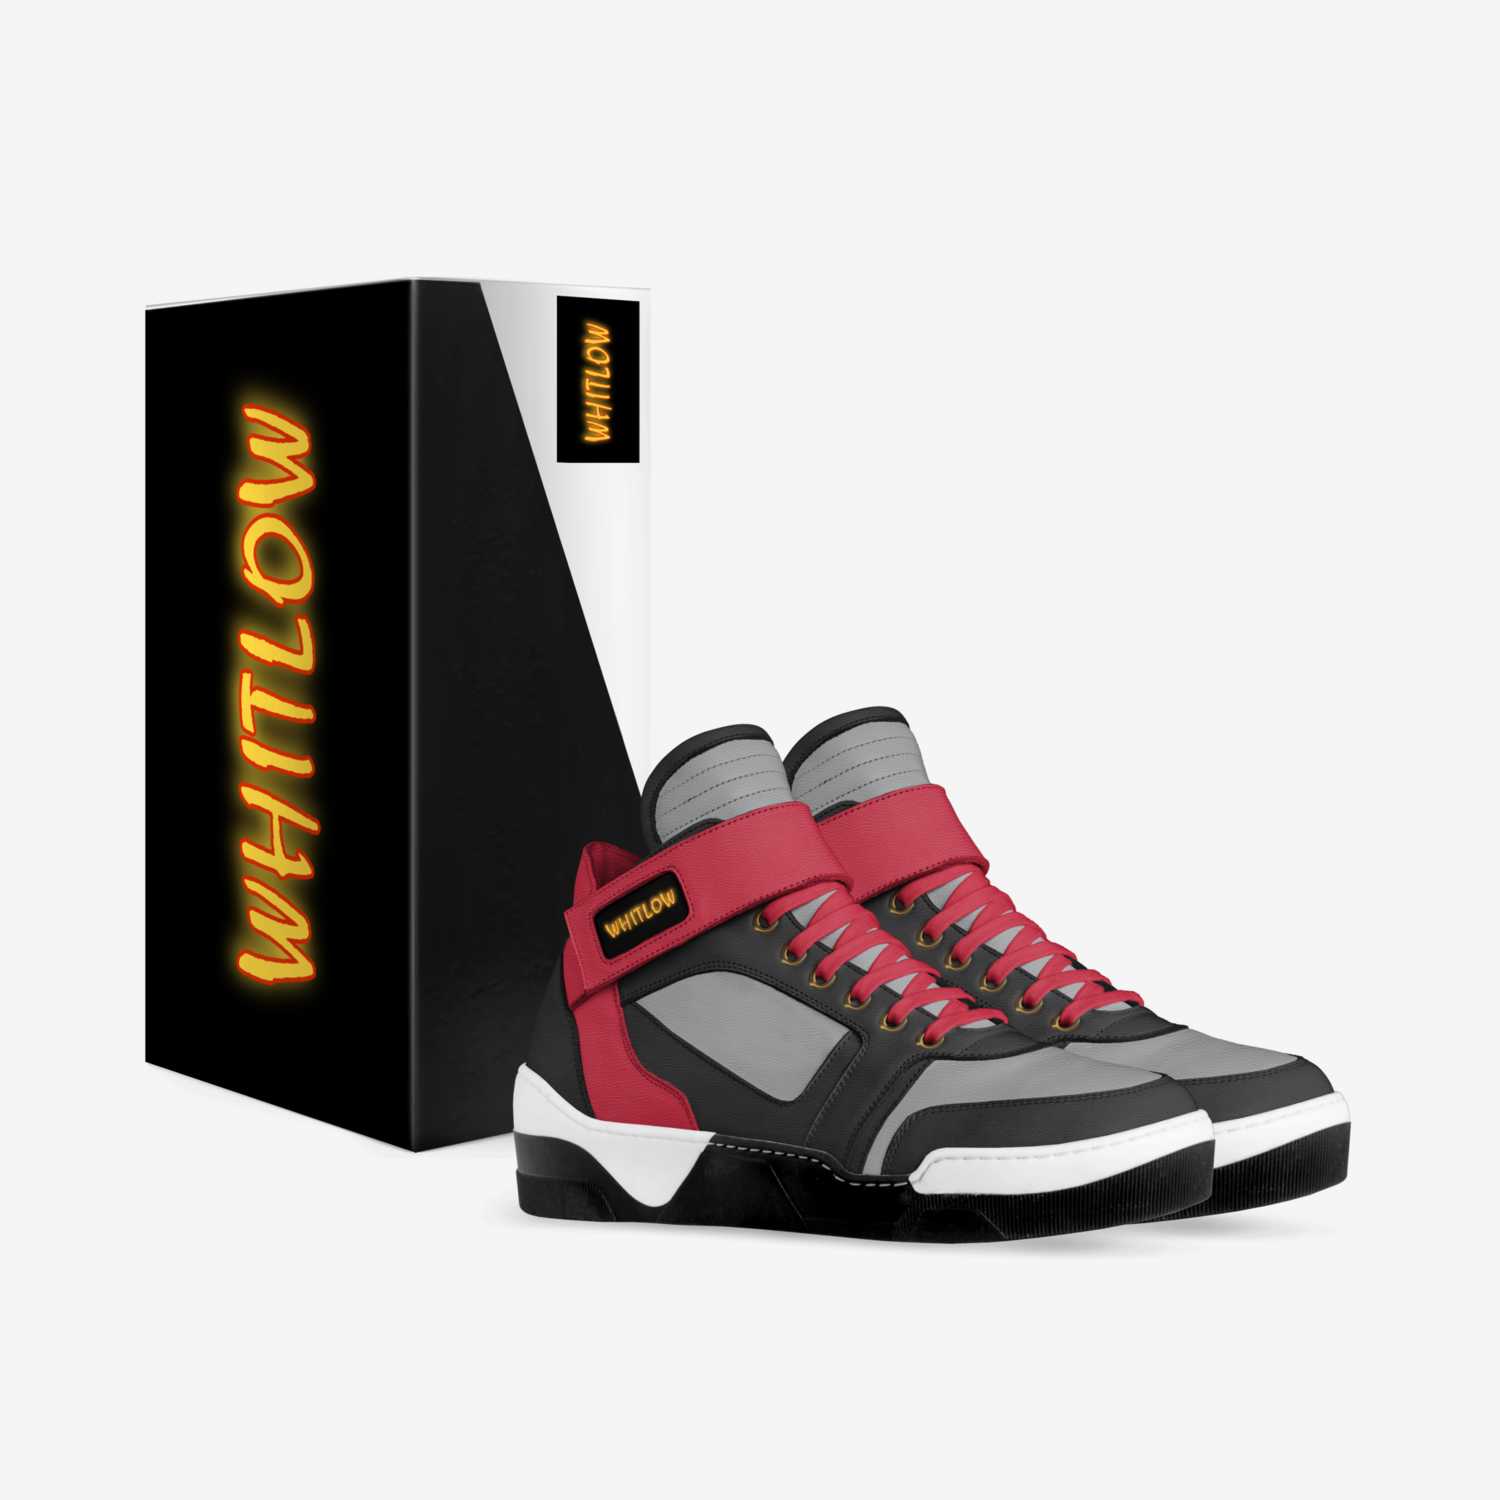 Whitlow custom made in Italy shoes by Shawn Whitlow | Box view